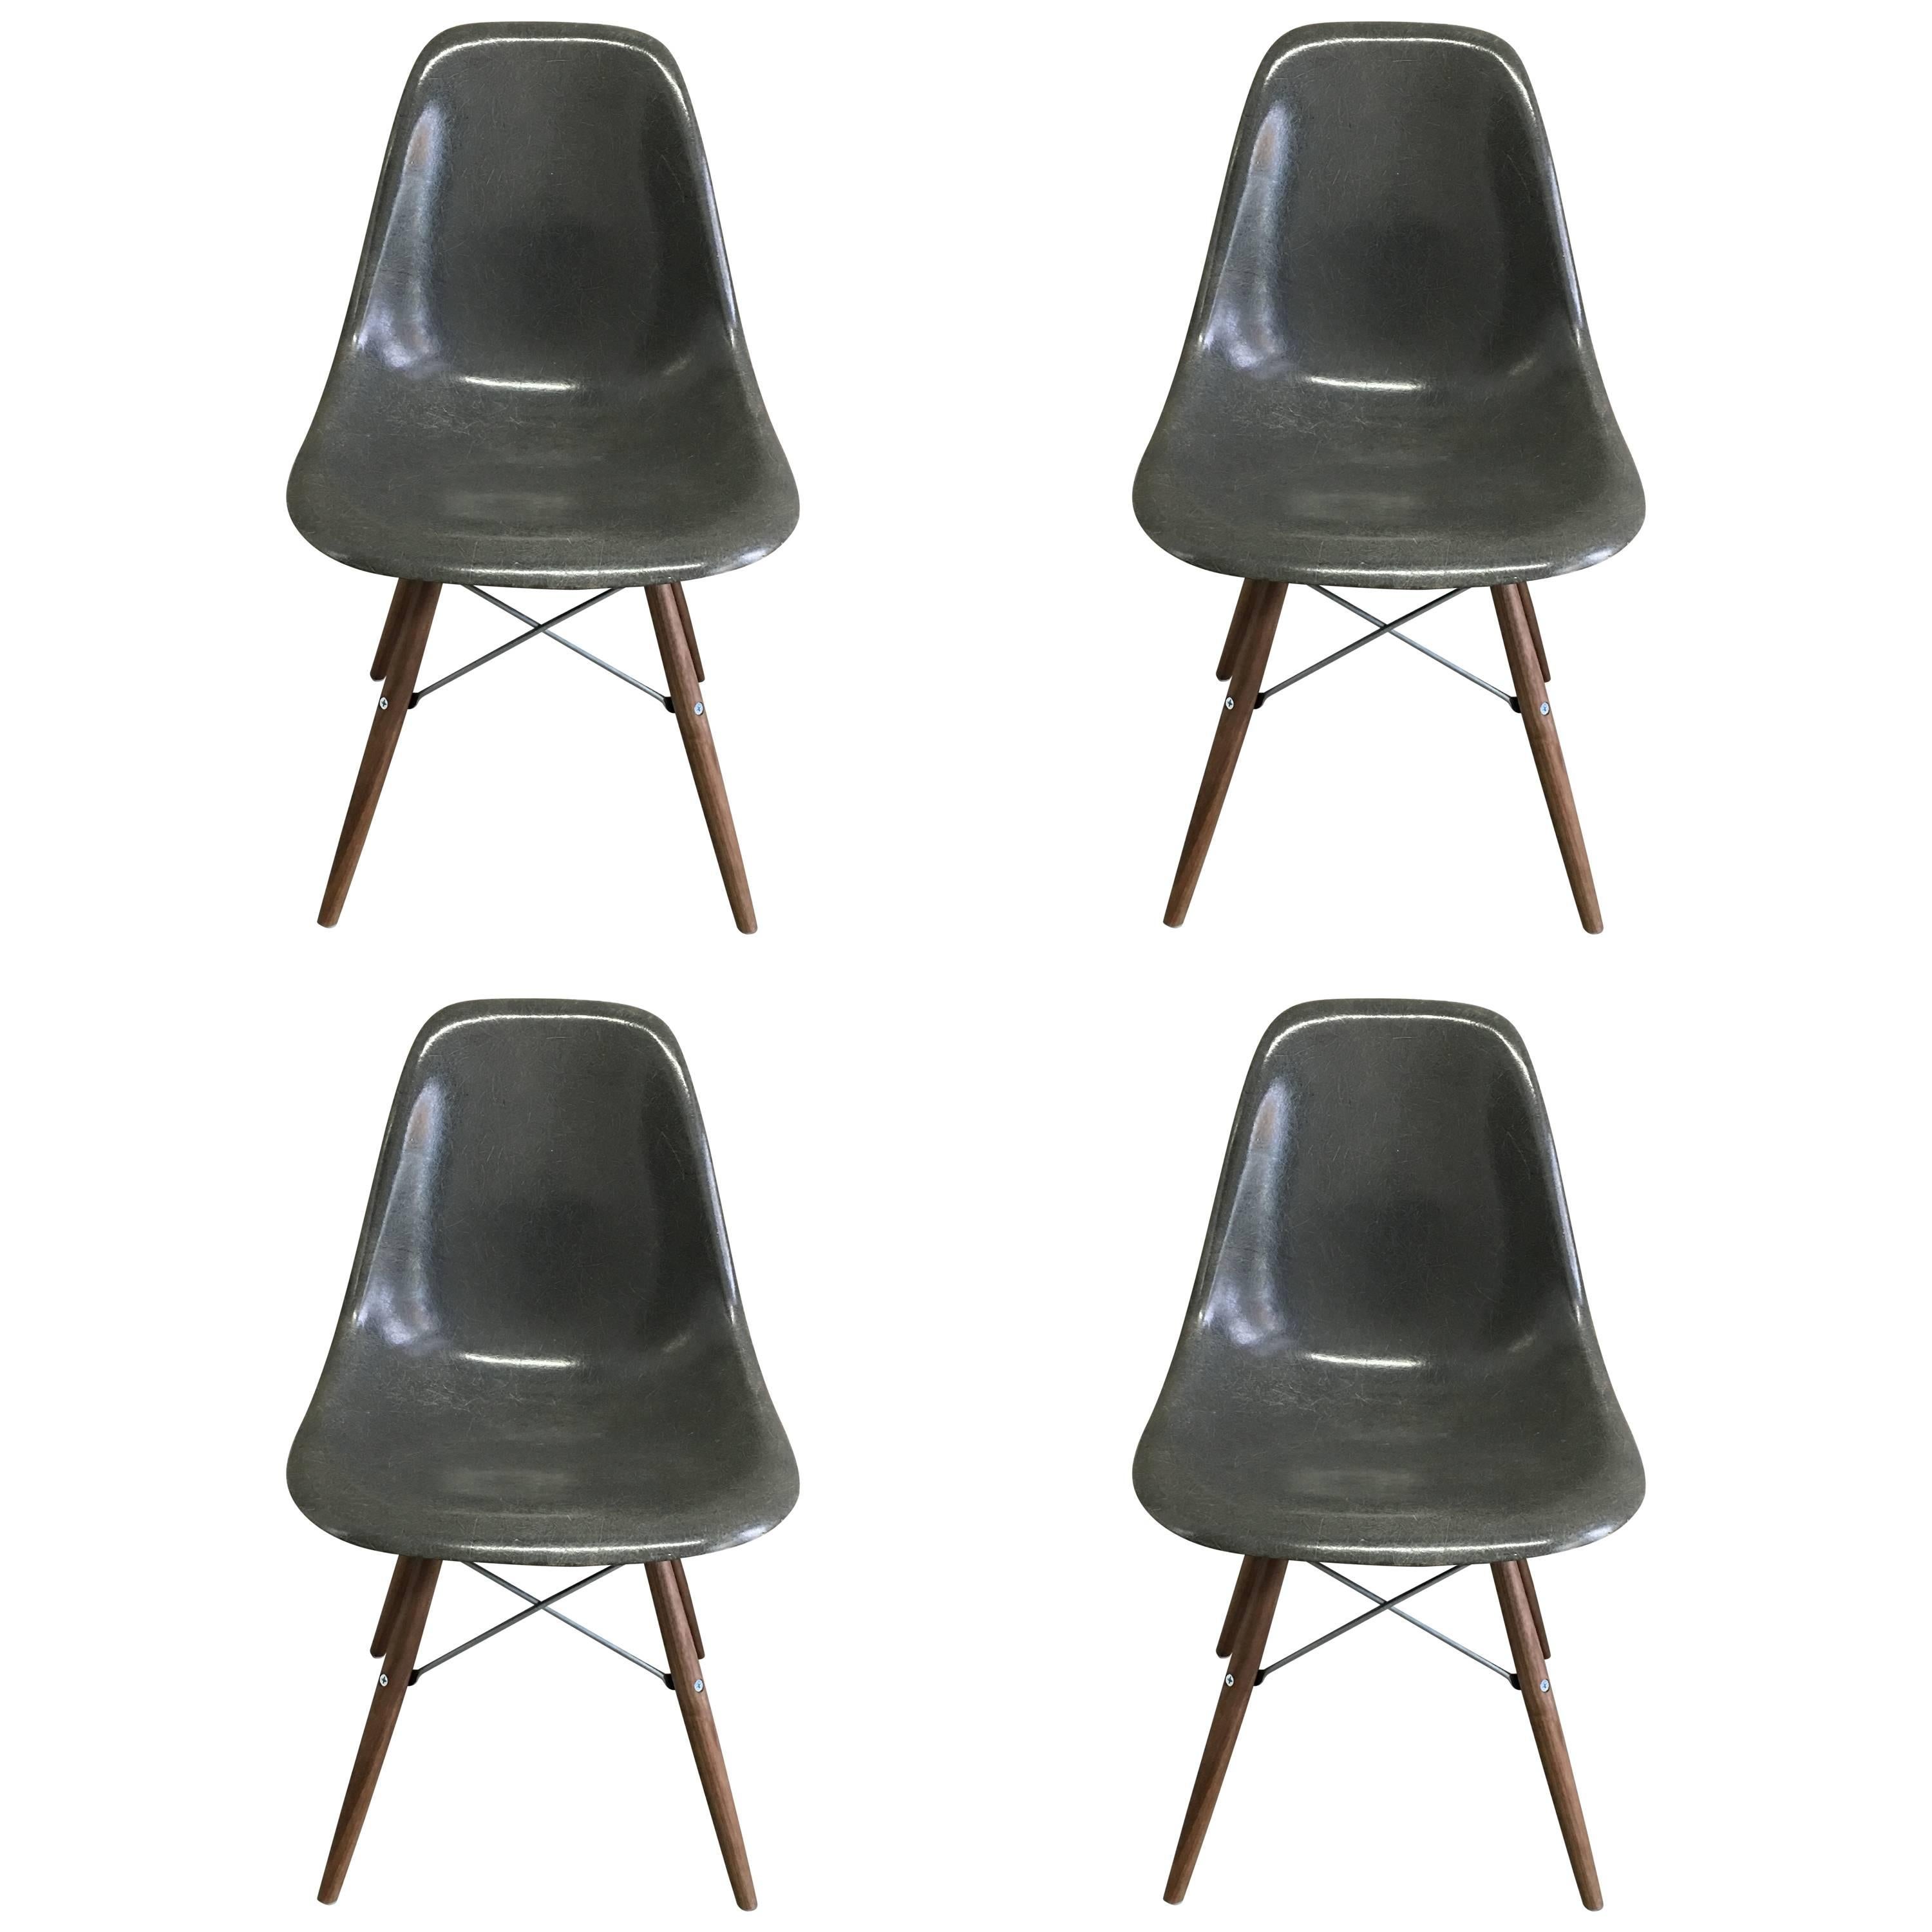 Four Herman Miller Eames vintage fiberglass dining chairs in elephant grey. All shells in vintage condition. New walnut stained dowel bases.